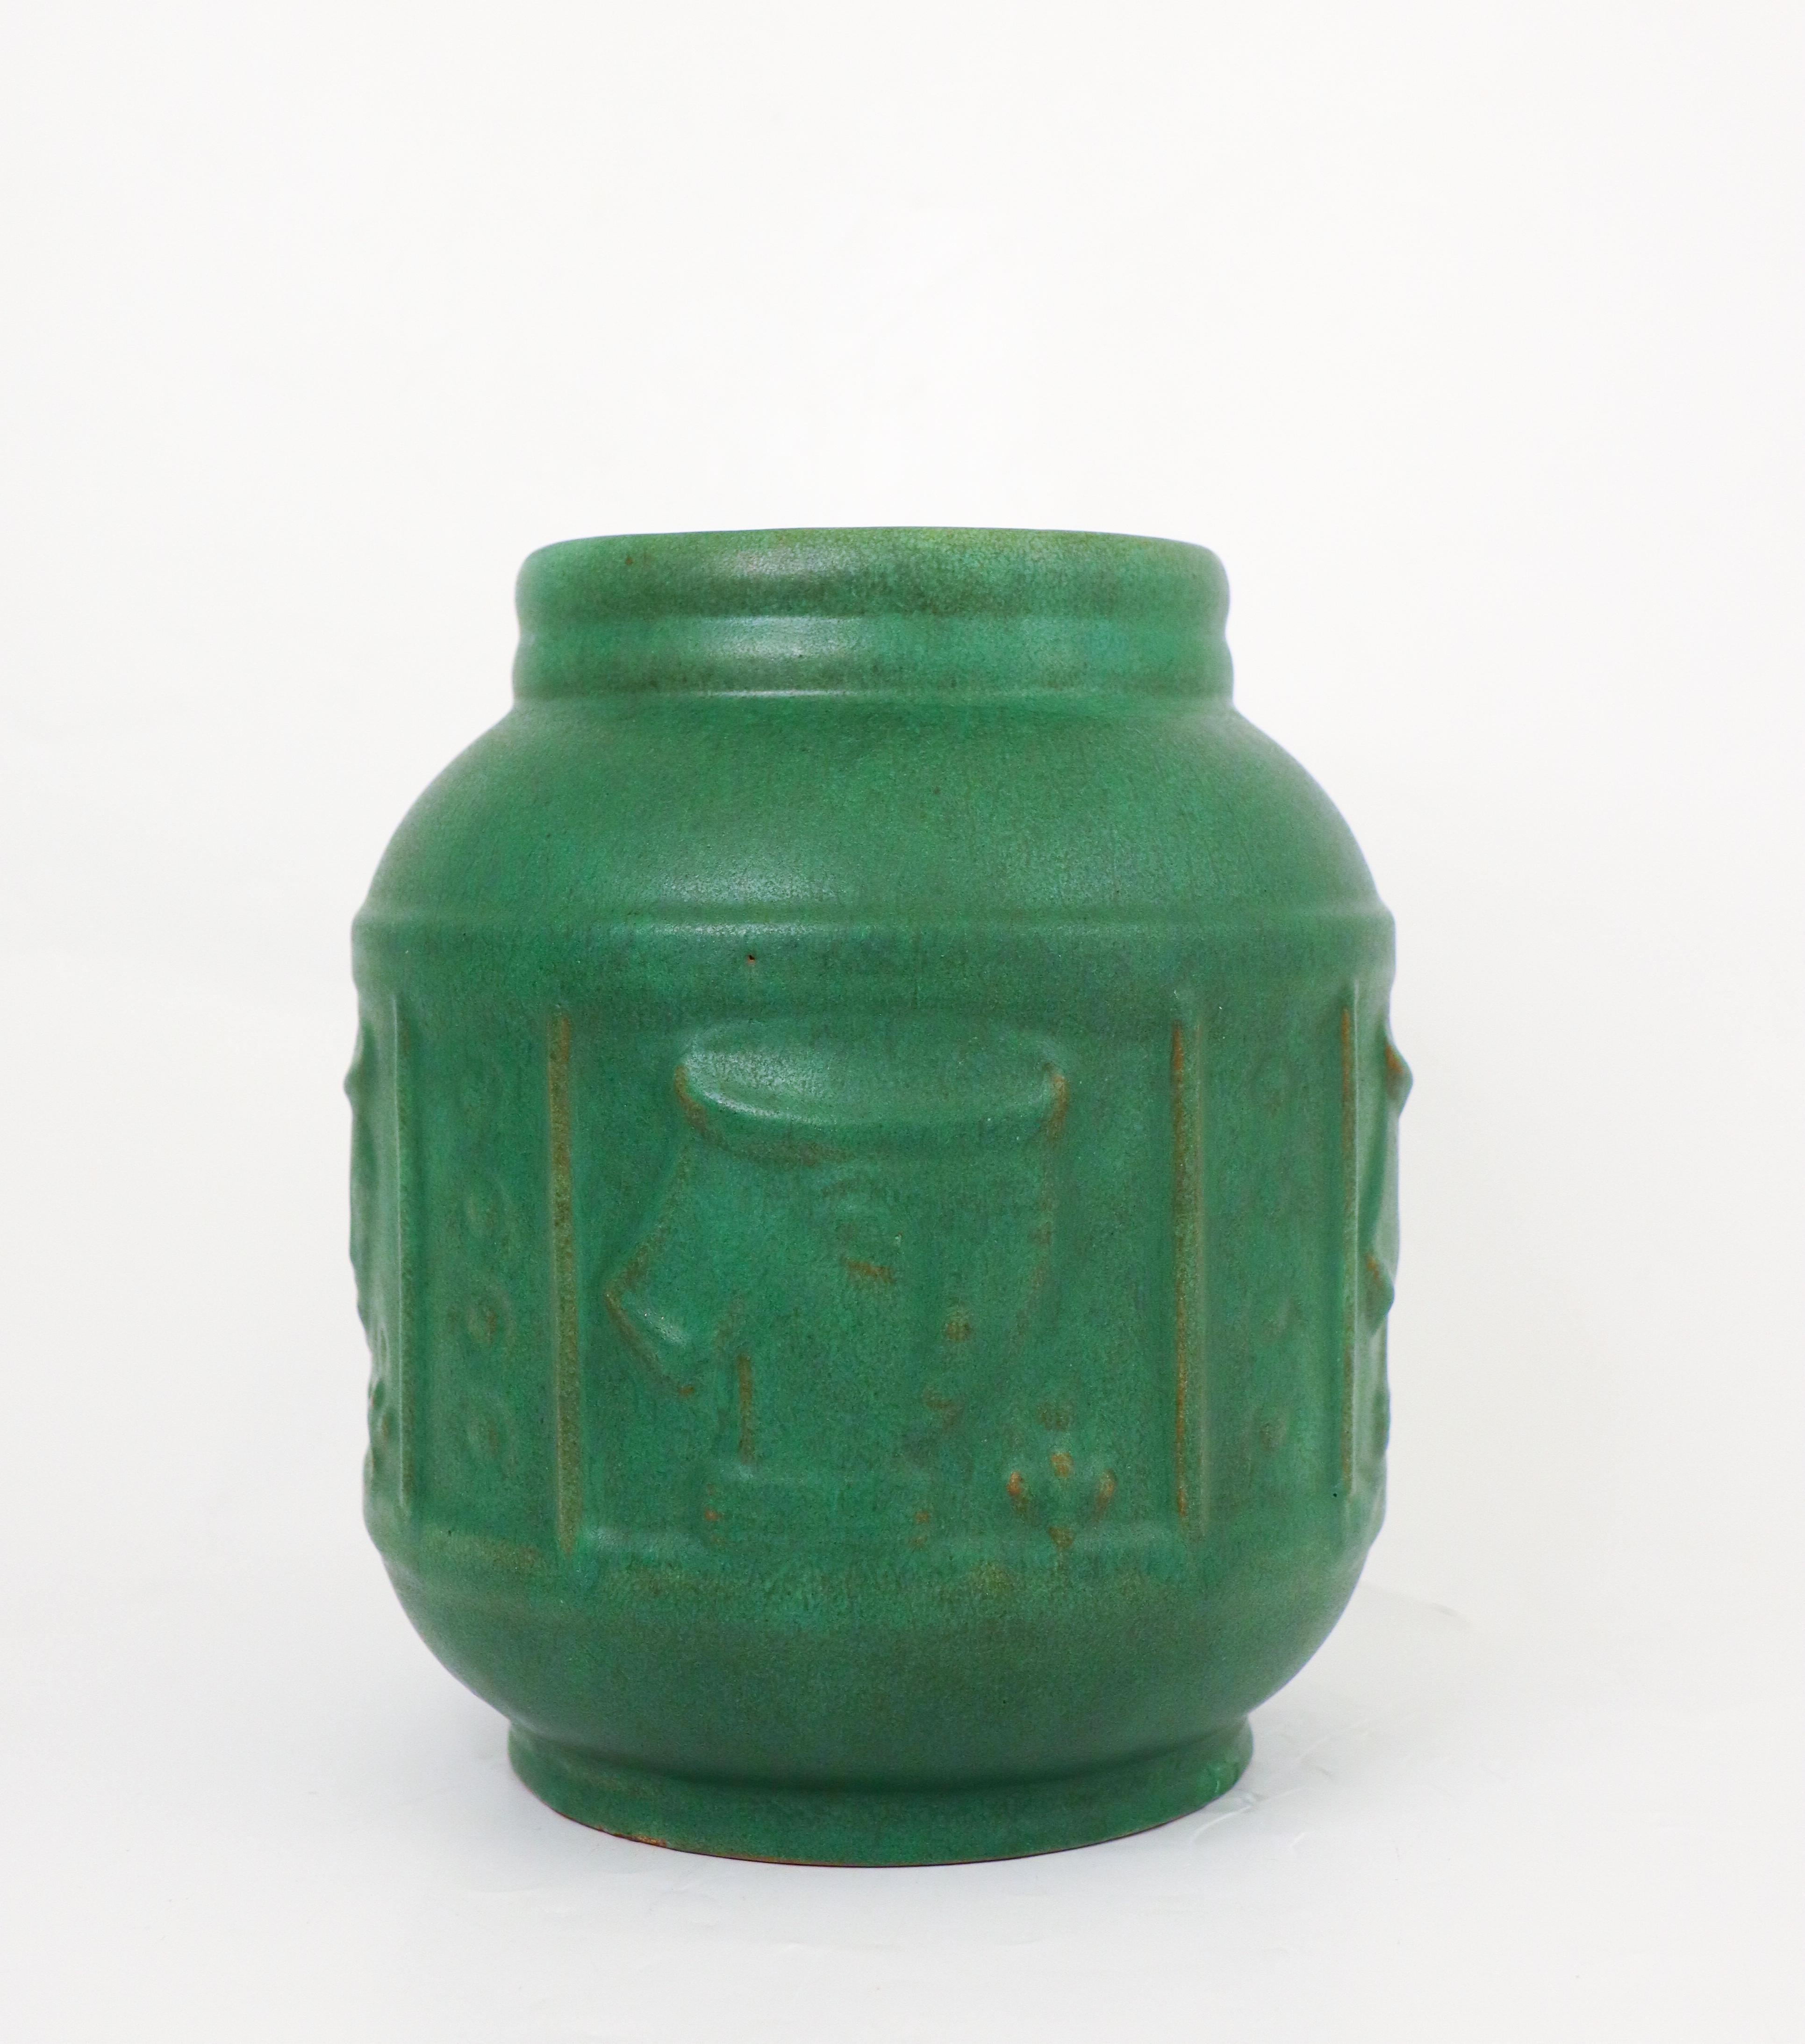 A large dark green ceramic vase with faces in relief designed by Kupittaa Savi in Finland. The vase is 21 cm high and in very good condition except from a minor repair on the base and some minor chips near the base. 